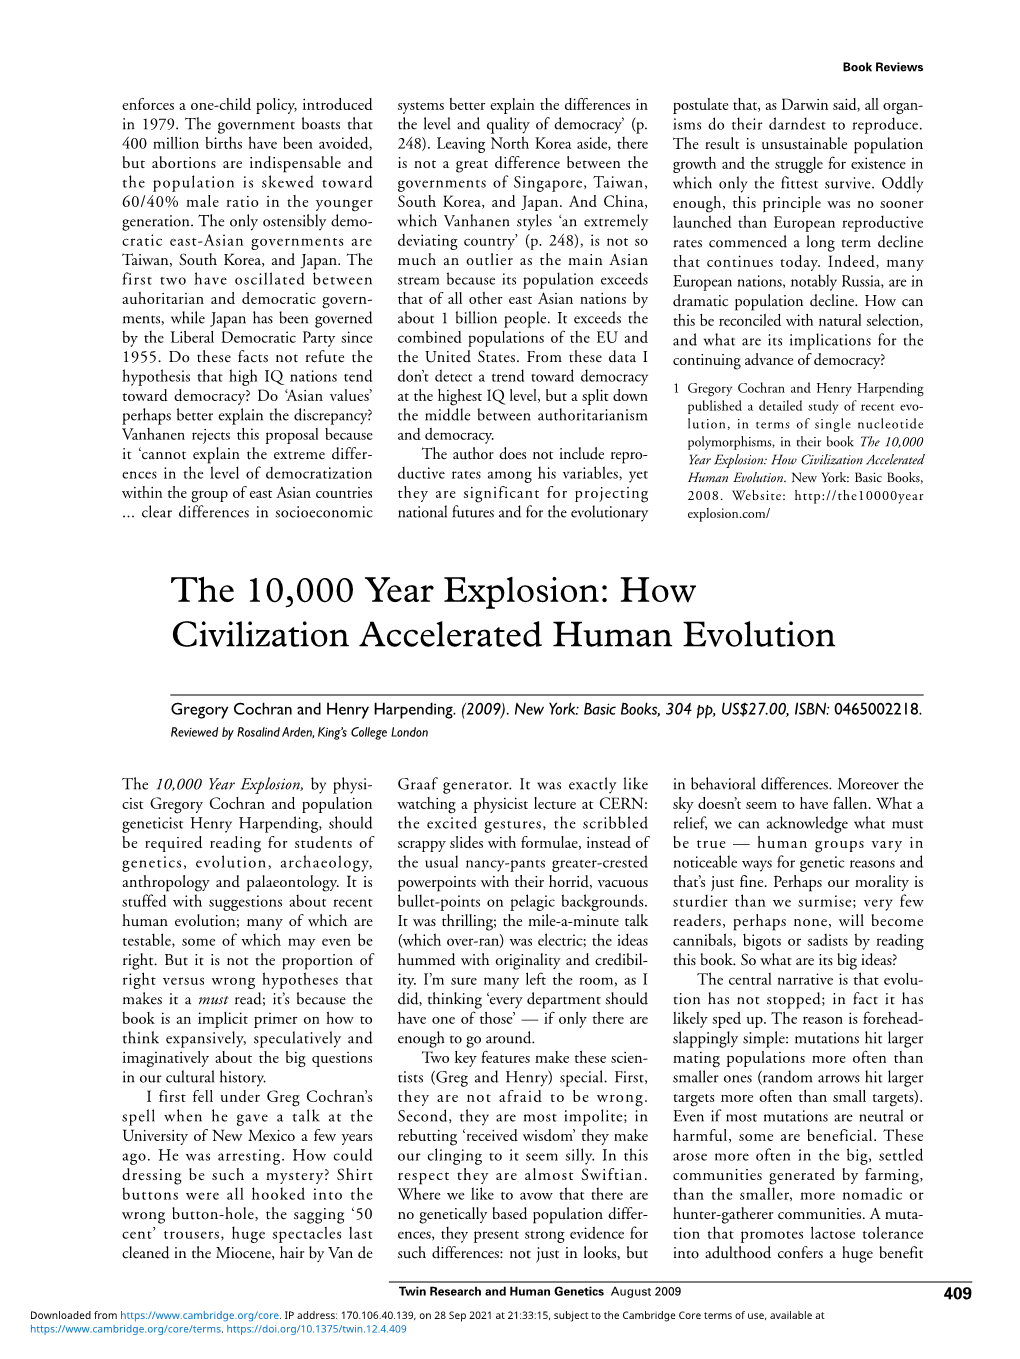 How Civilization Accelerated Human Evolution